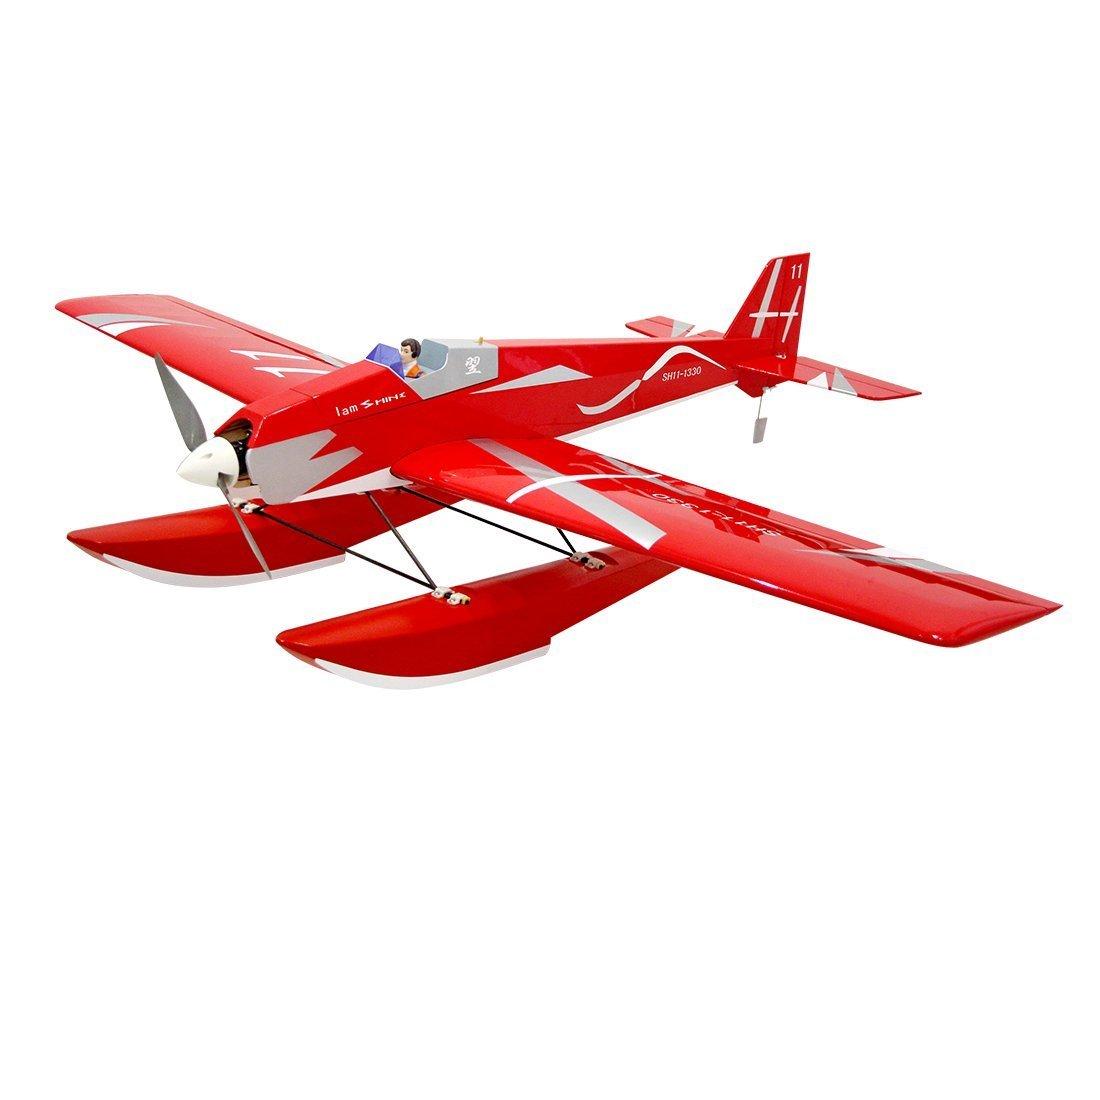 Large Rc Airplane Kits: Size, Material, and Assembly: Exploring Large RC Airplane Kits 